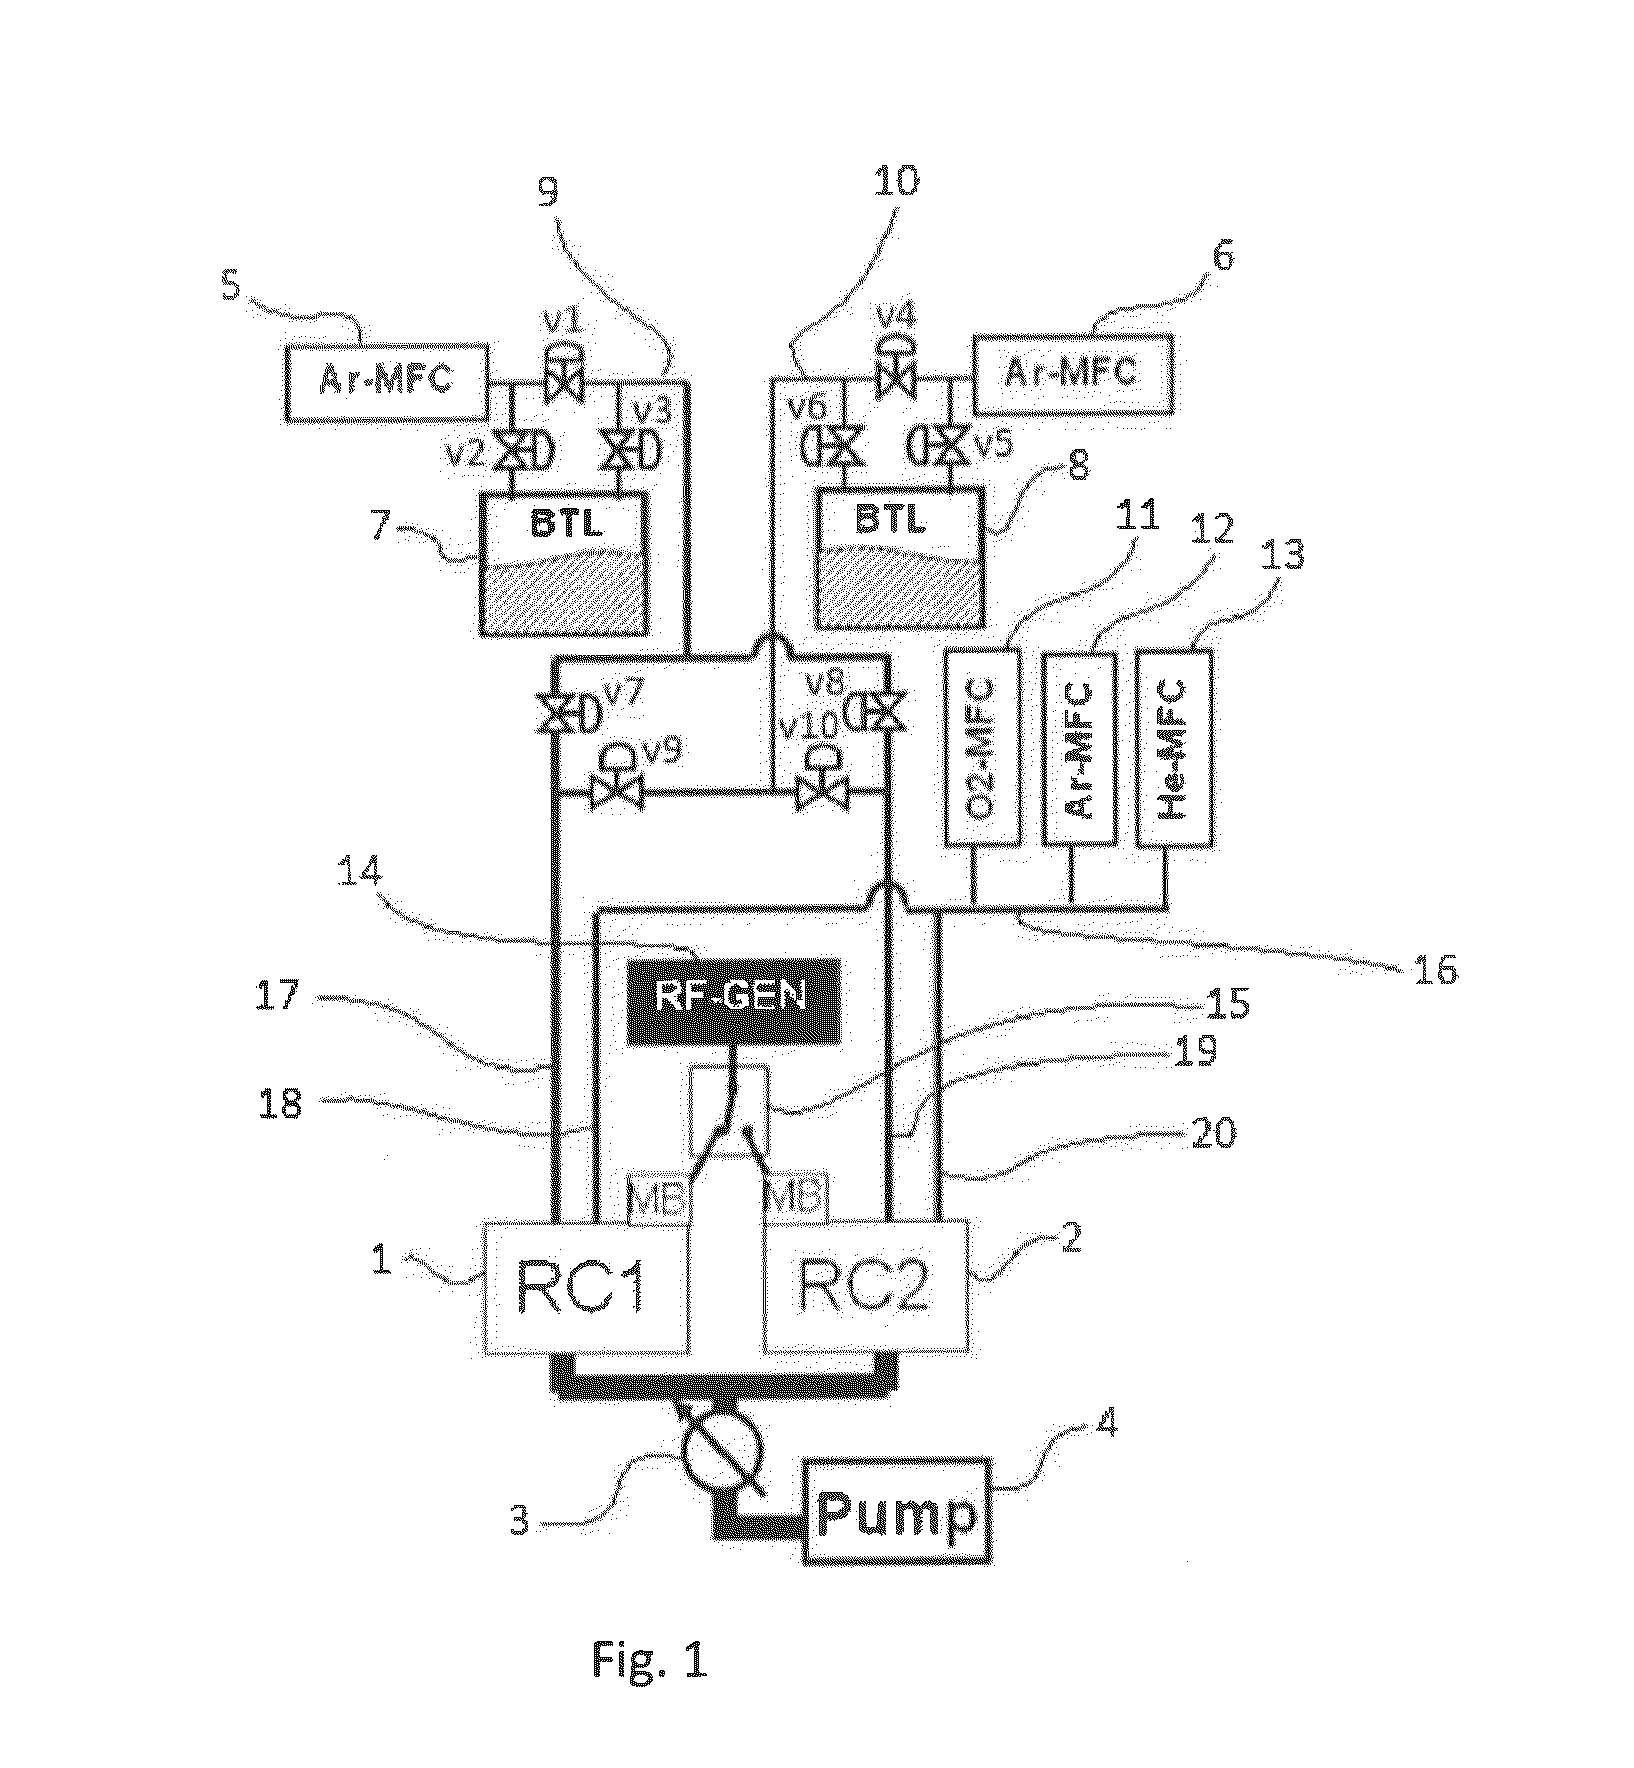 Method for Performing Uniform Processing in Gas System-Sharing Multiple Reaction Chambers